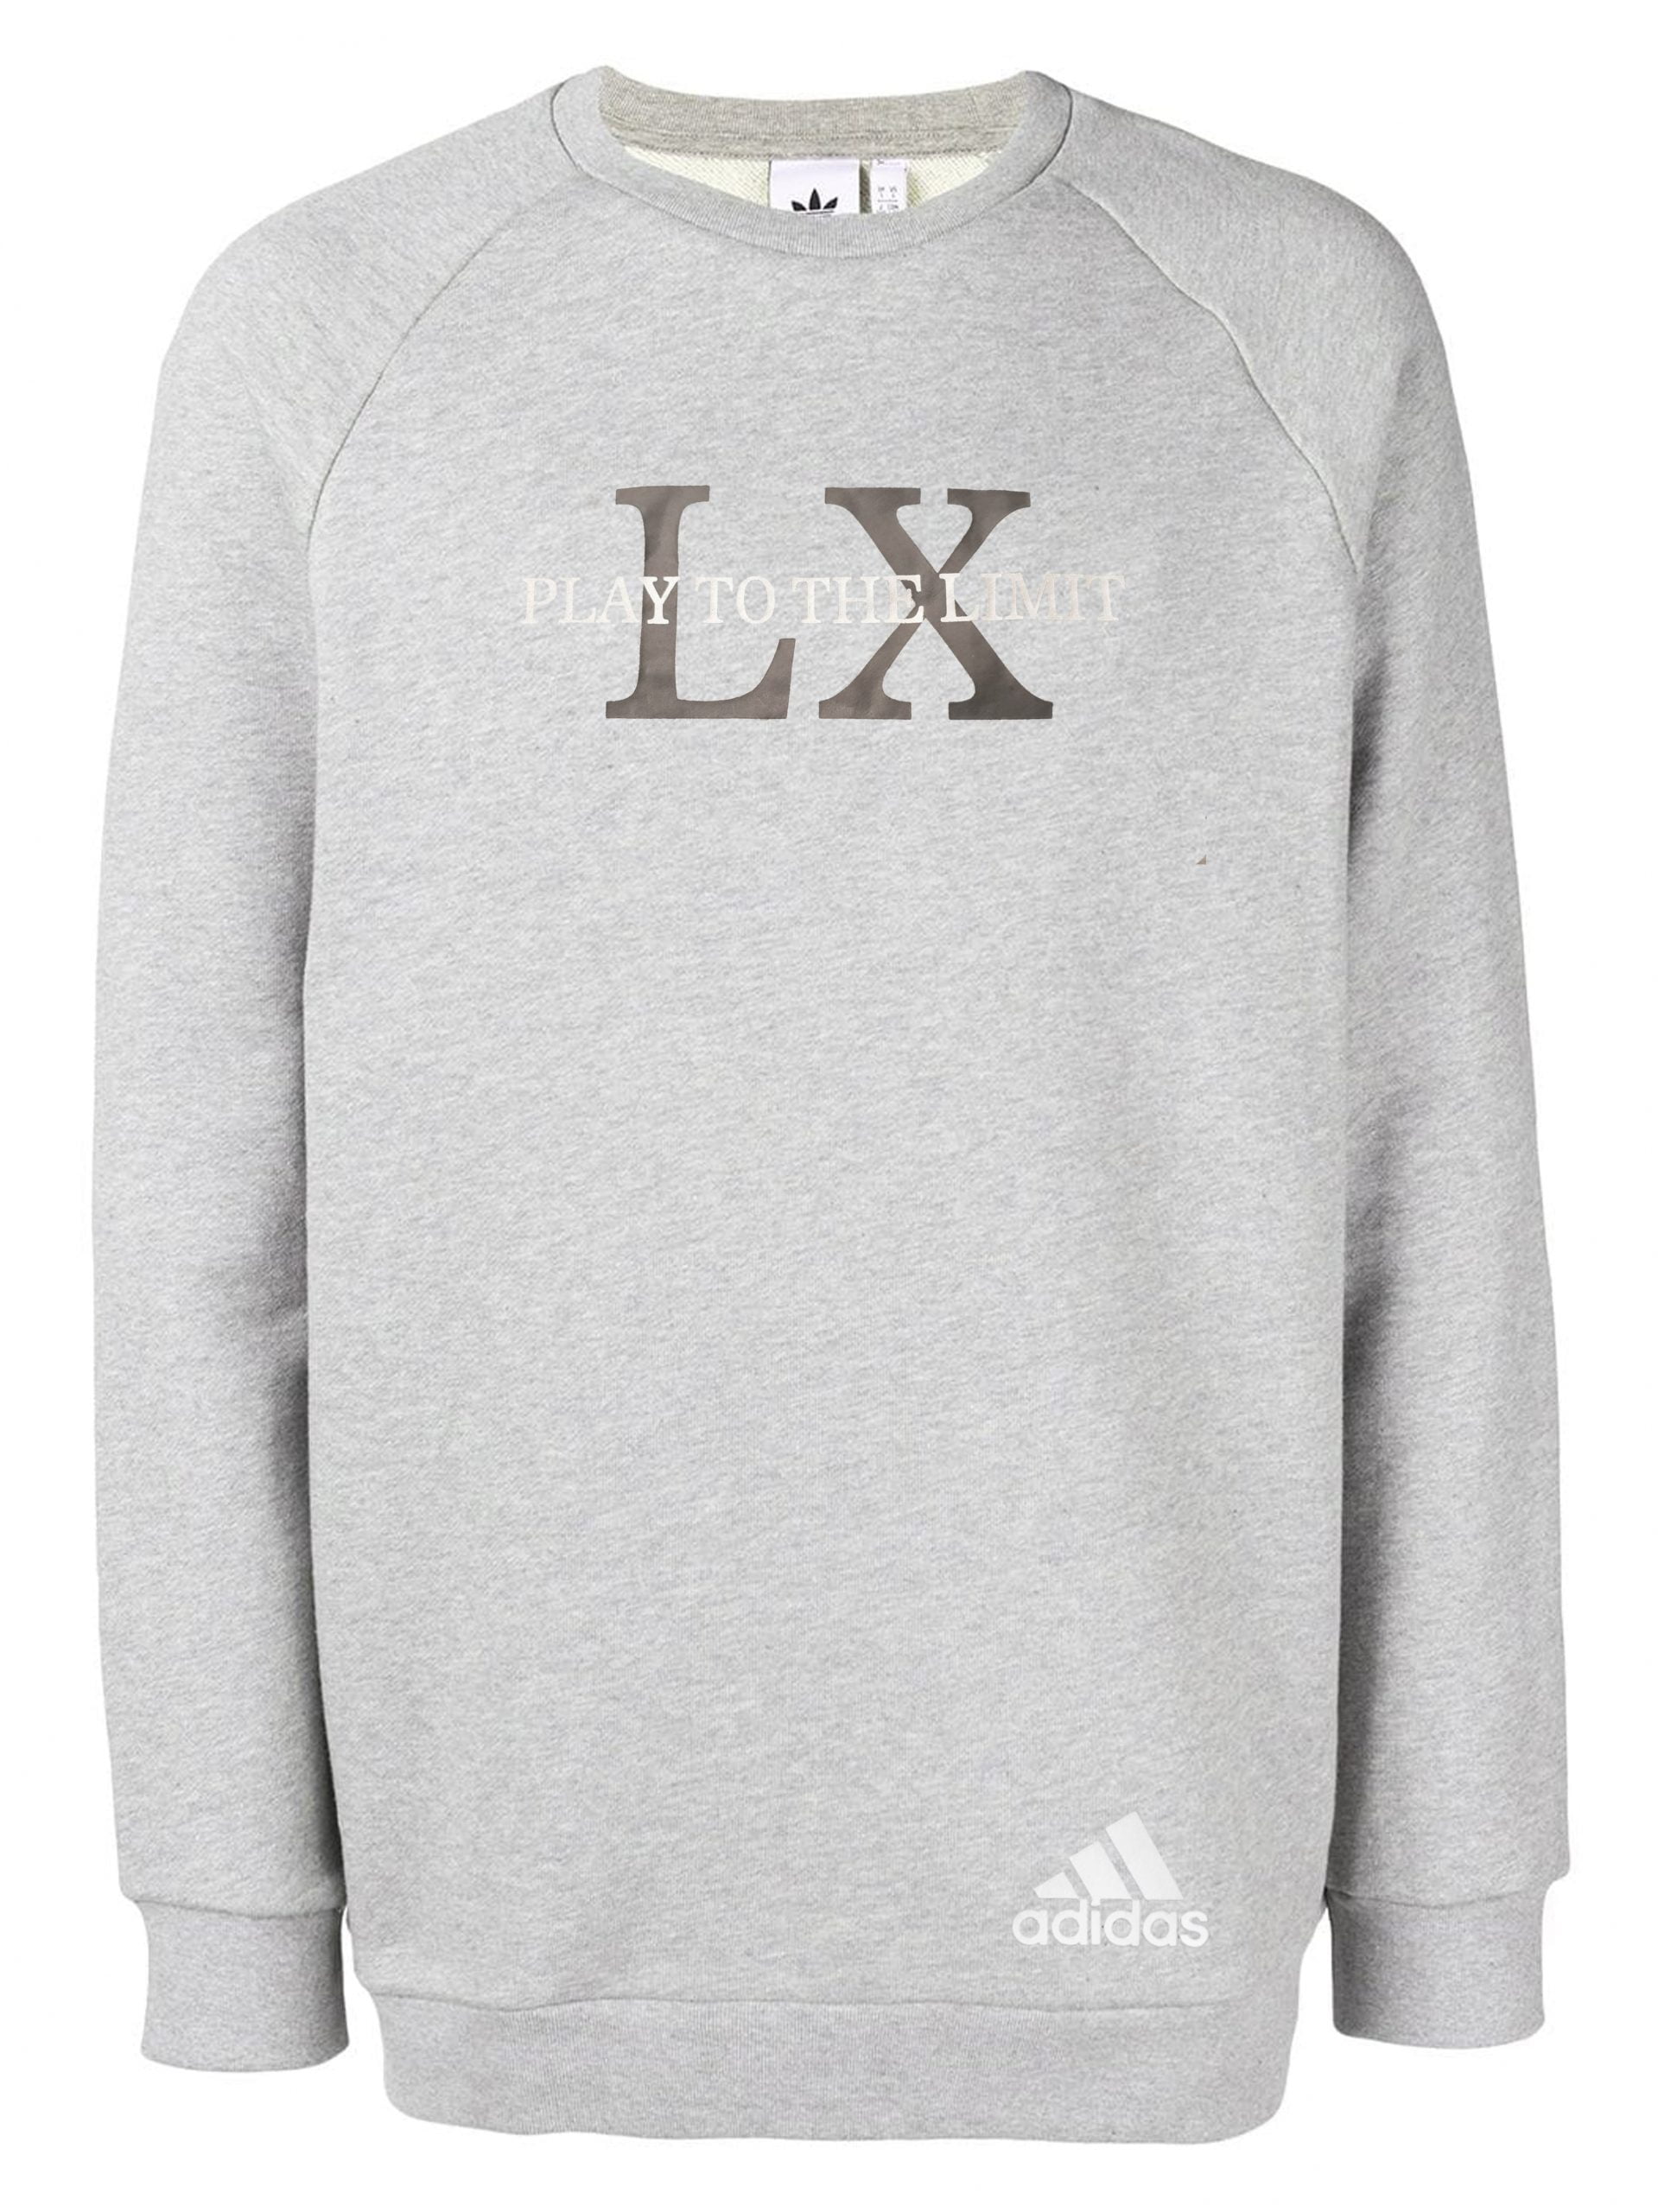 1 min 1 1 scaled - Adidas LX Pullover Sweater